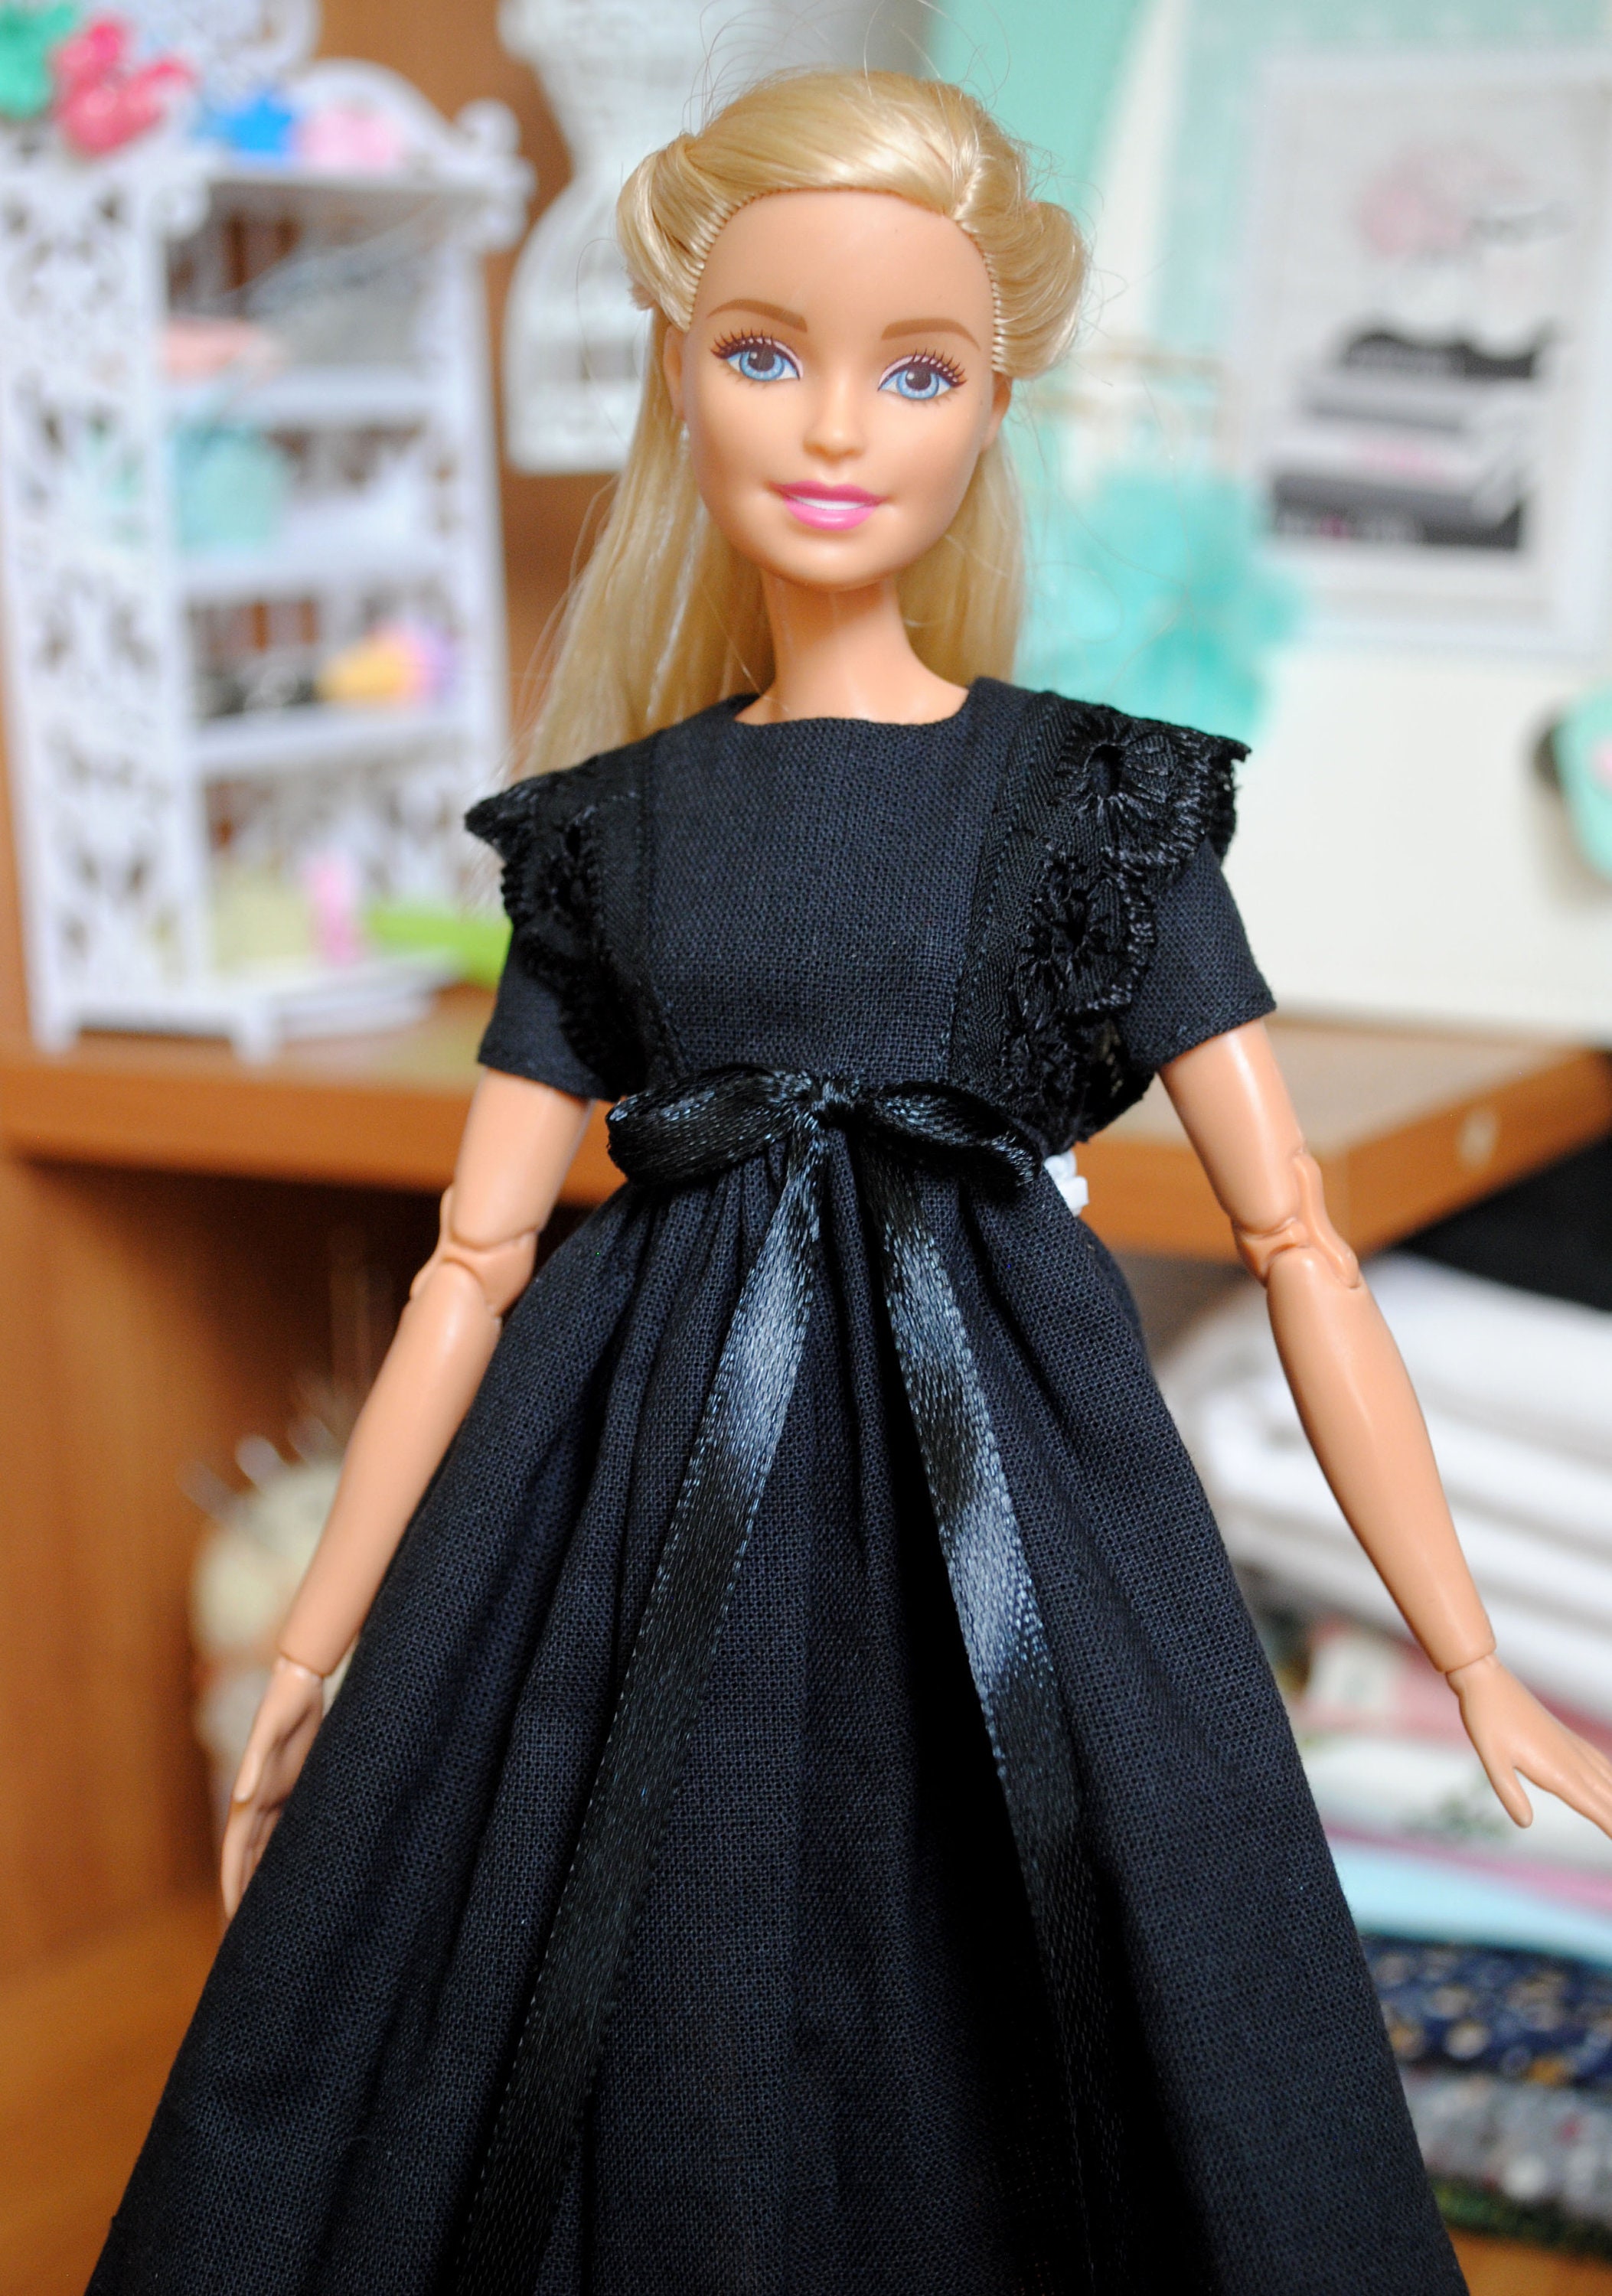 Barbie black dress with lace clothes for Barbie doll | Etsy